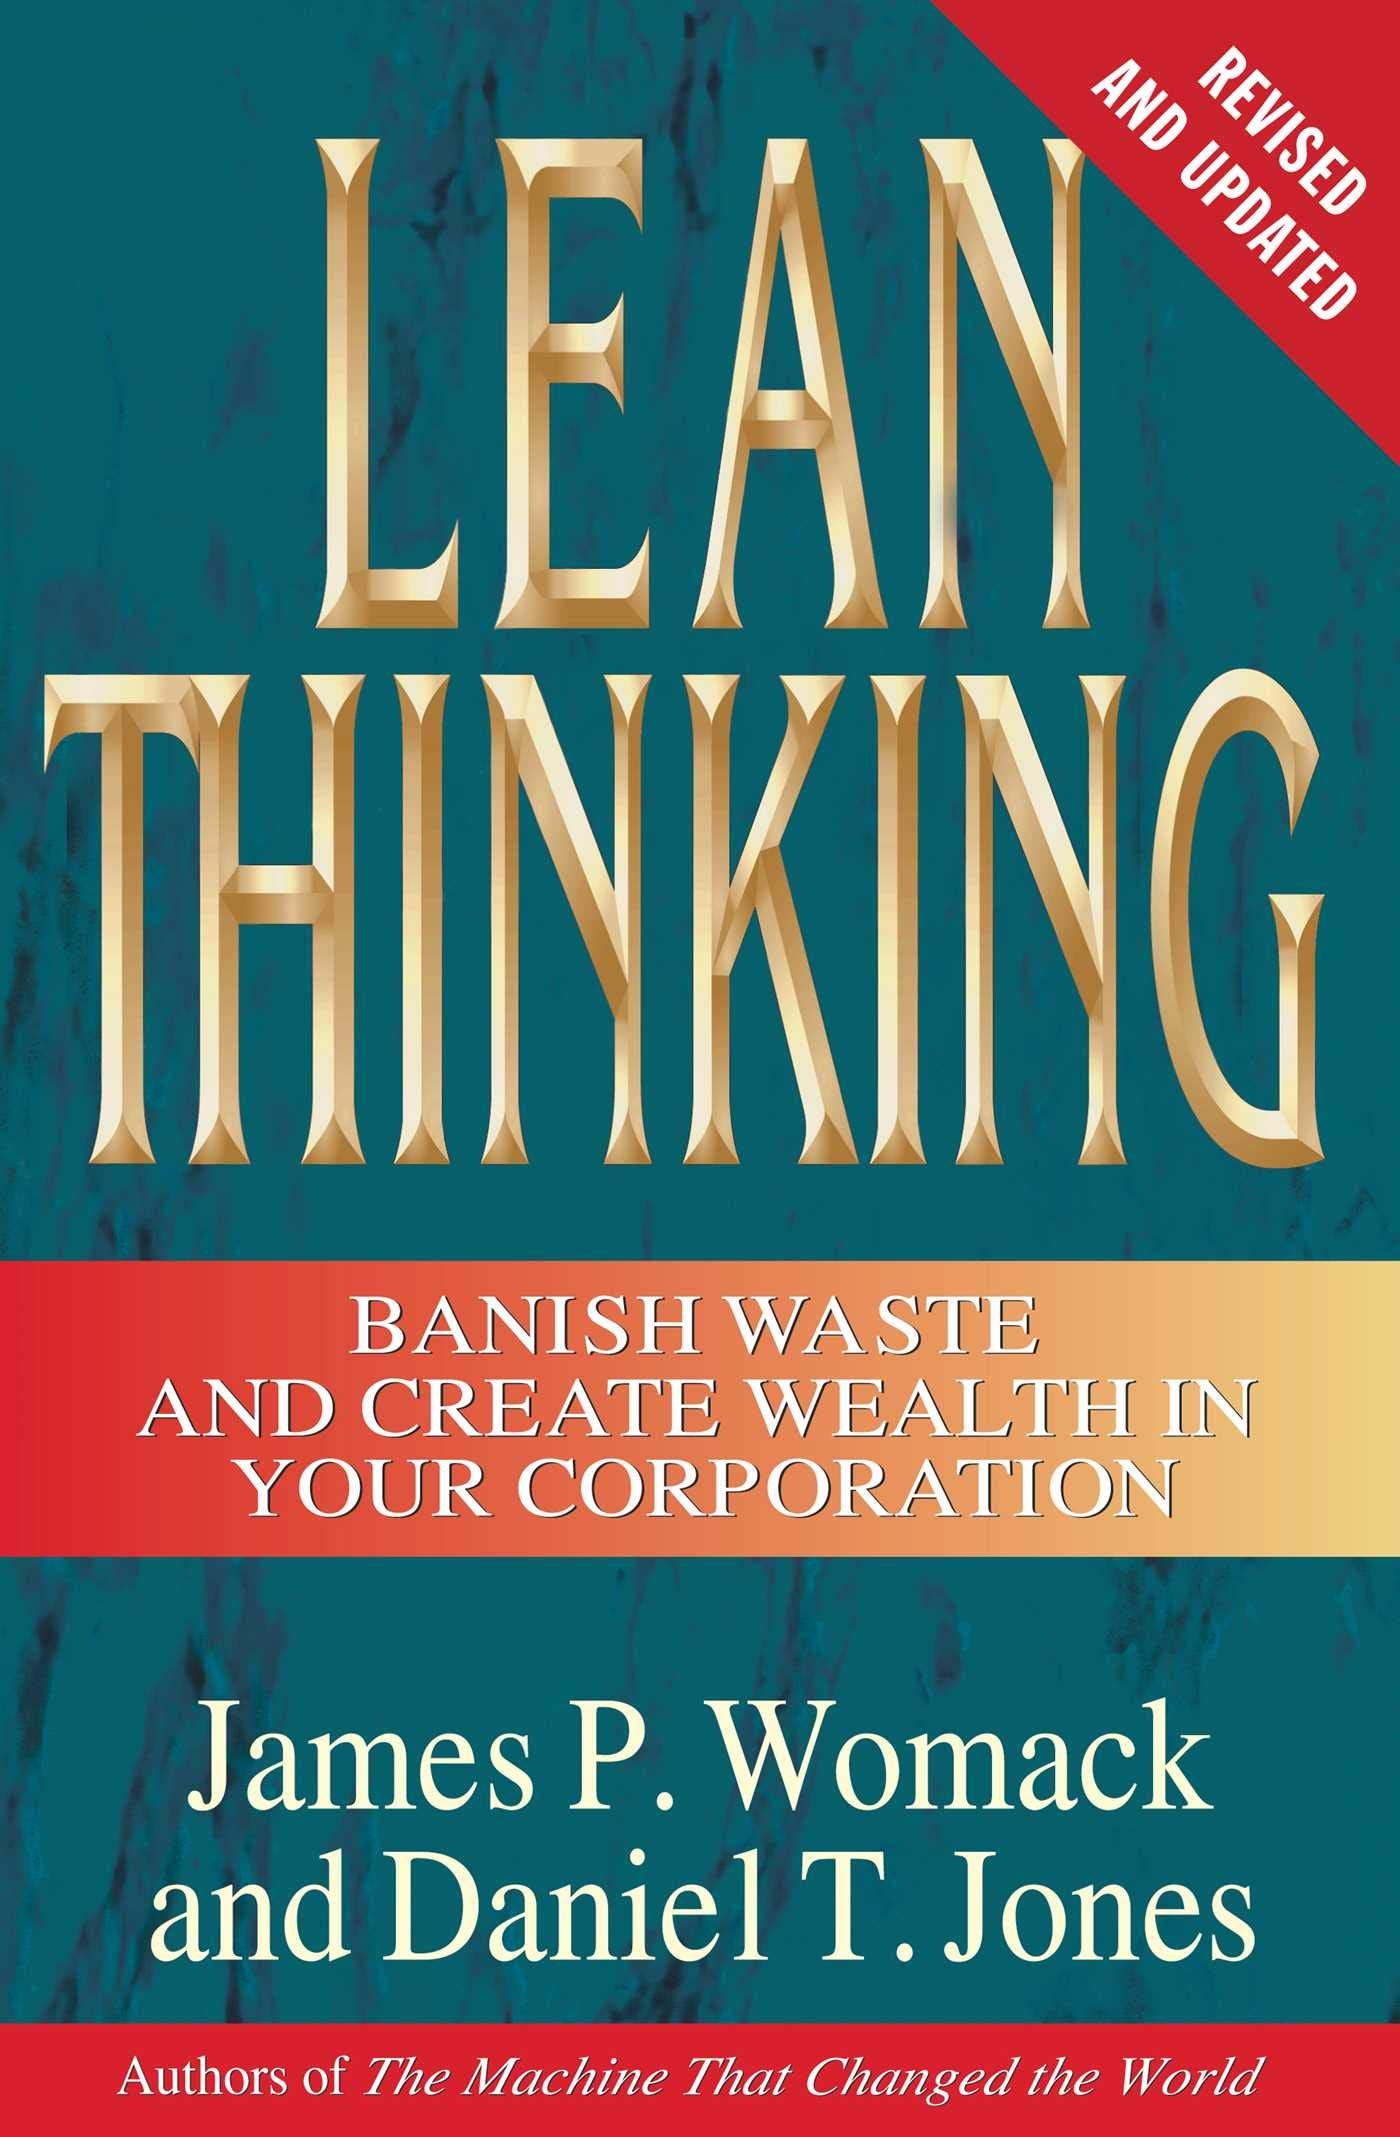 <p>This book imparts lessons about improving efficiency based on case studies of lean companies across various industries.</p>